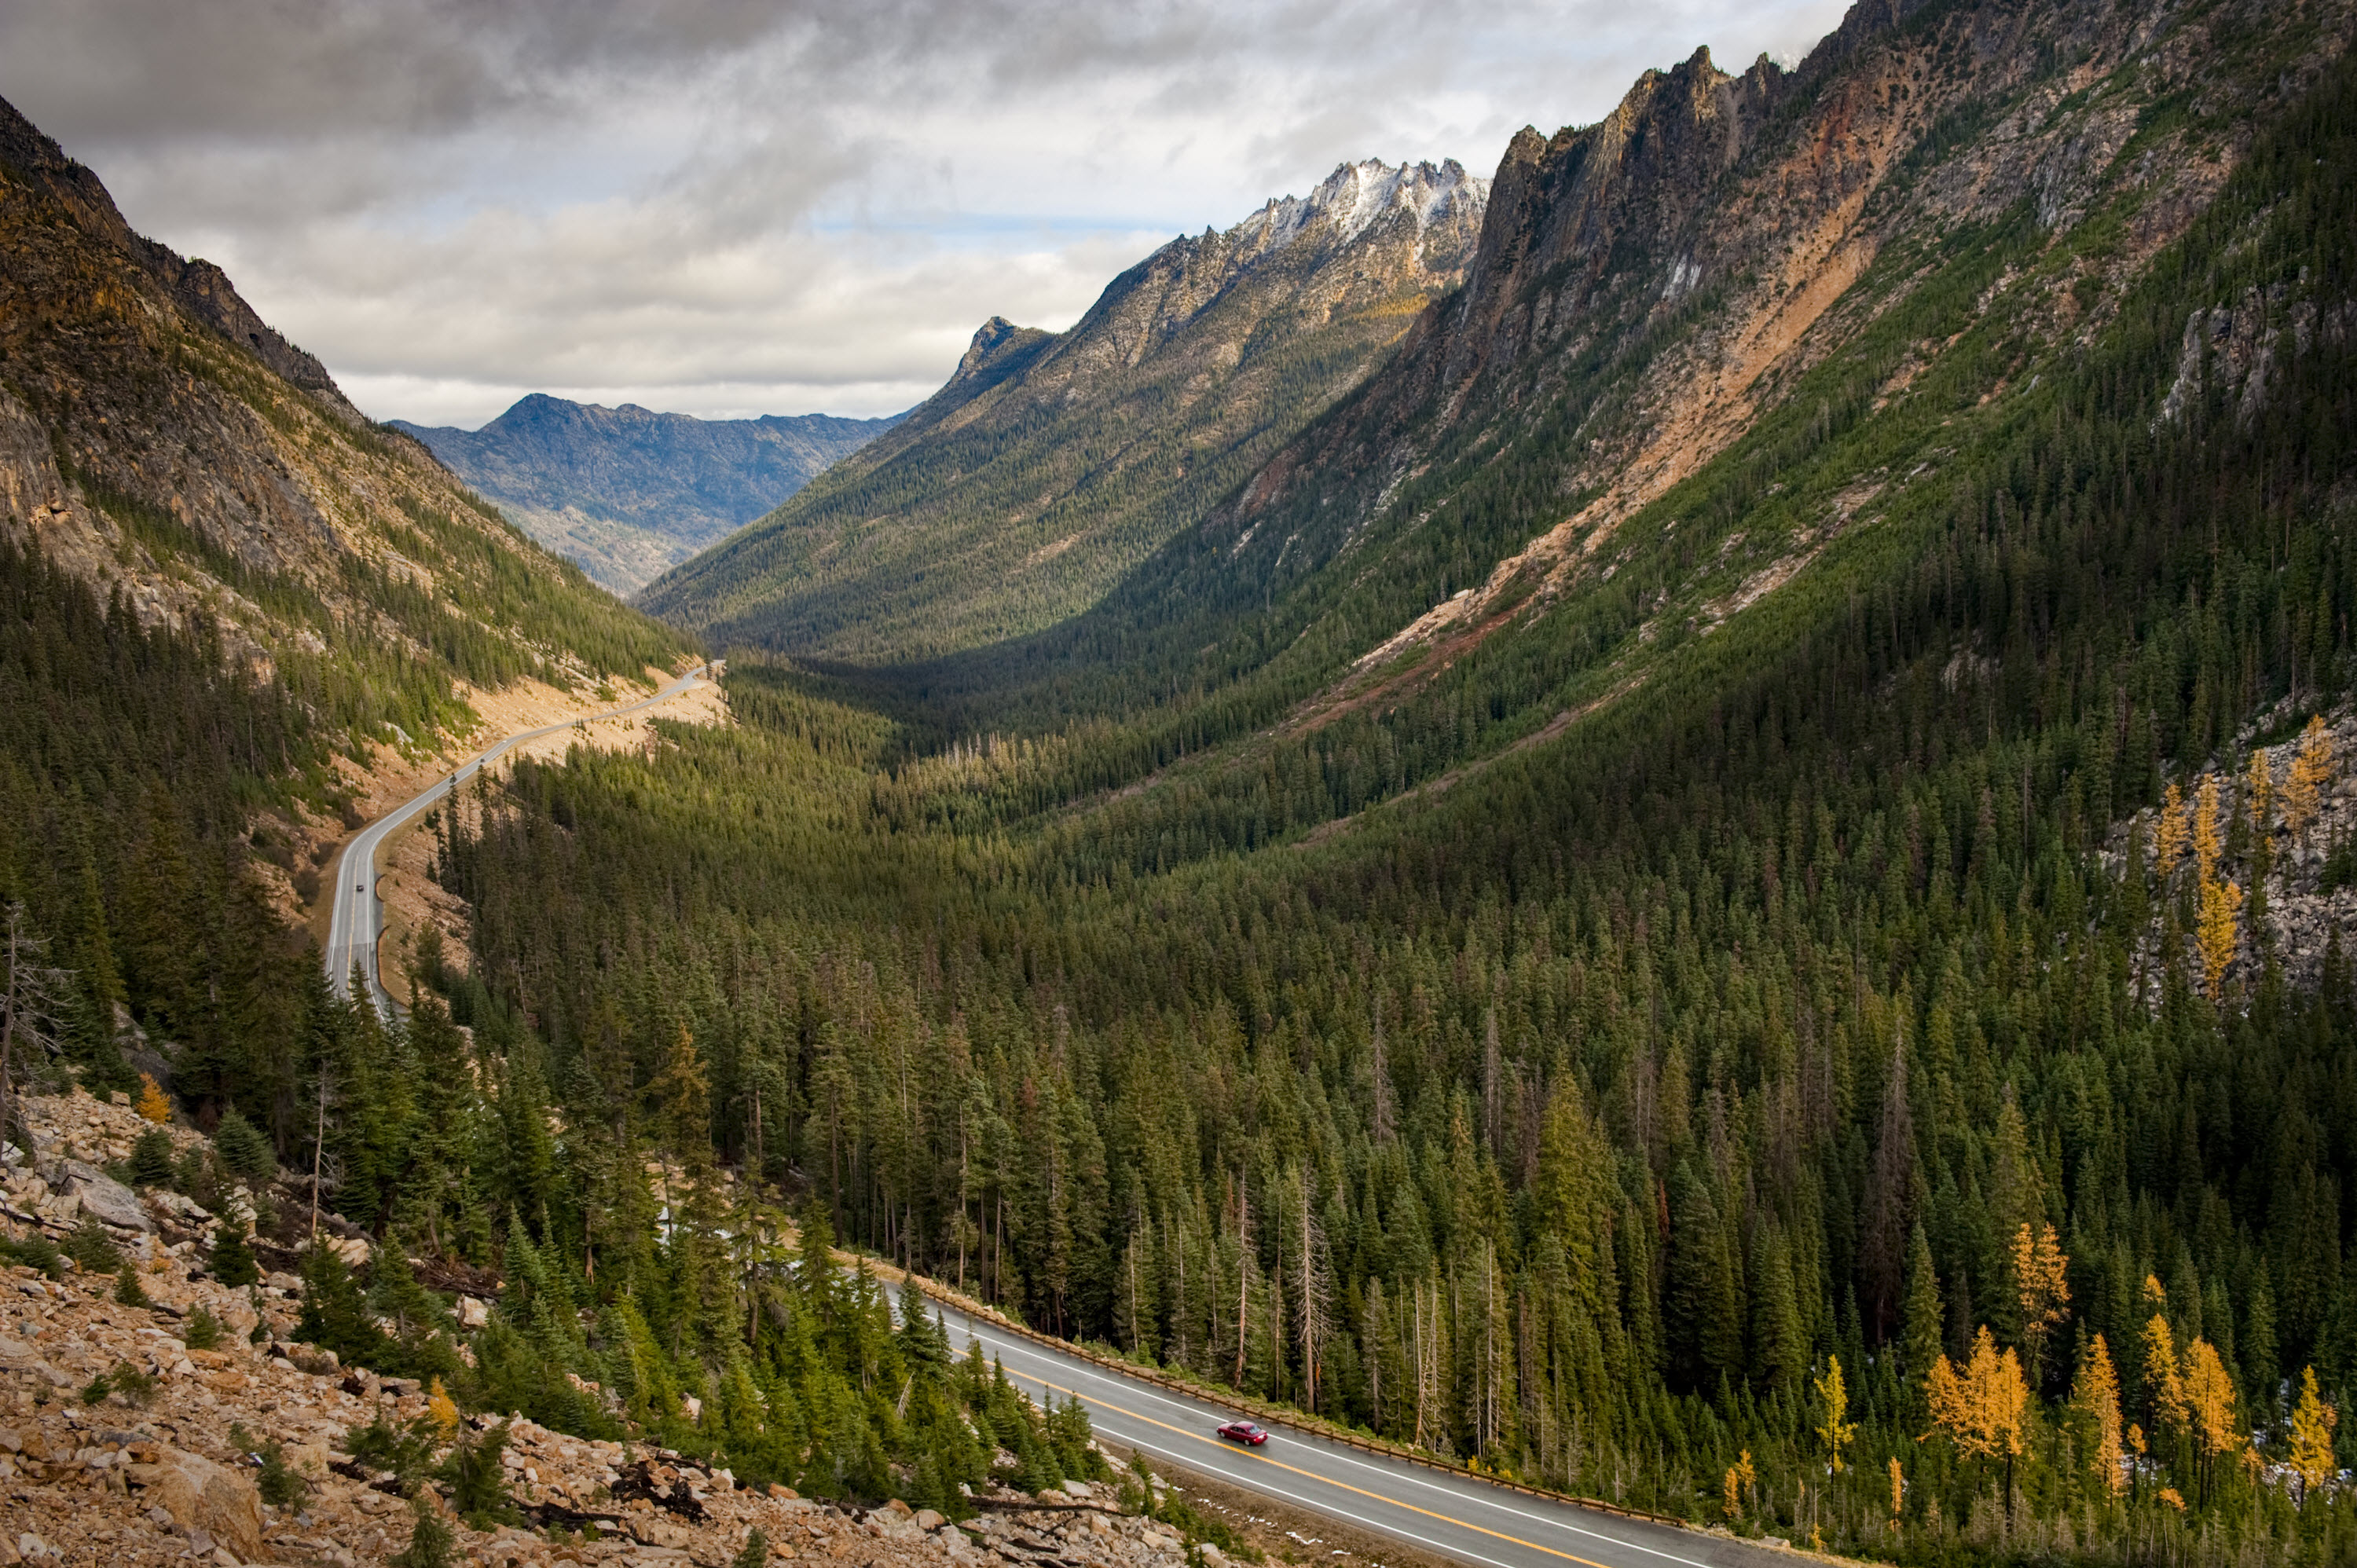 North Cascades Highway in the fall. Photo credit: istockphoto